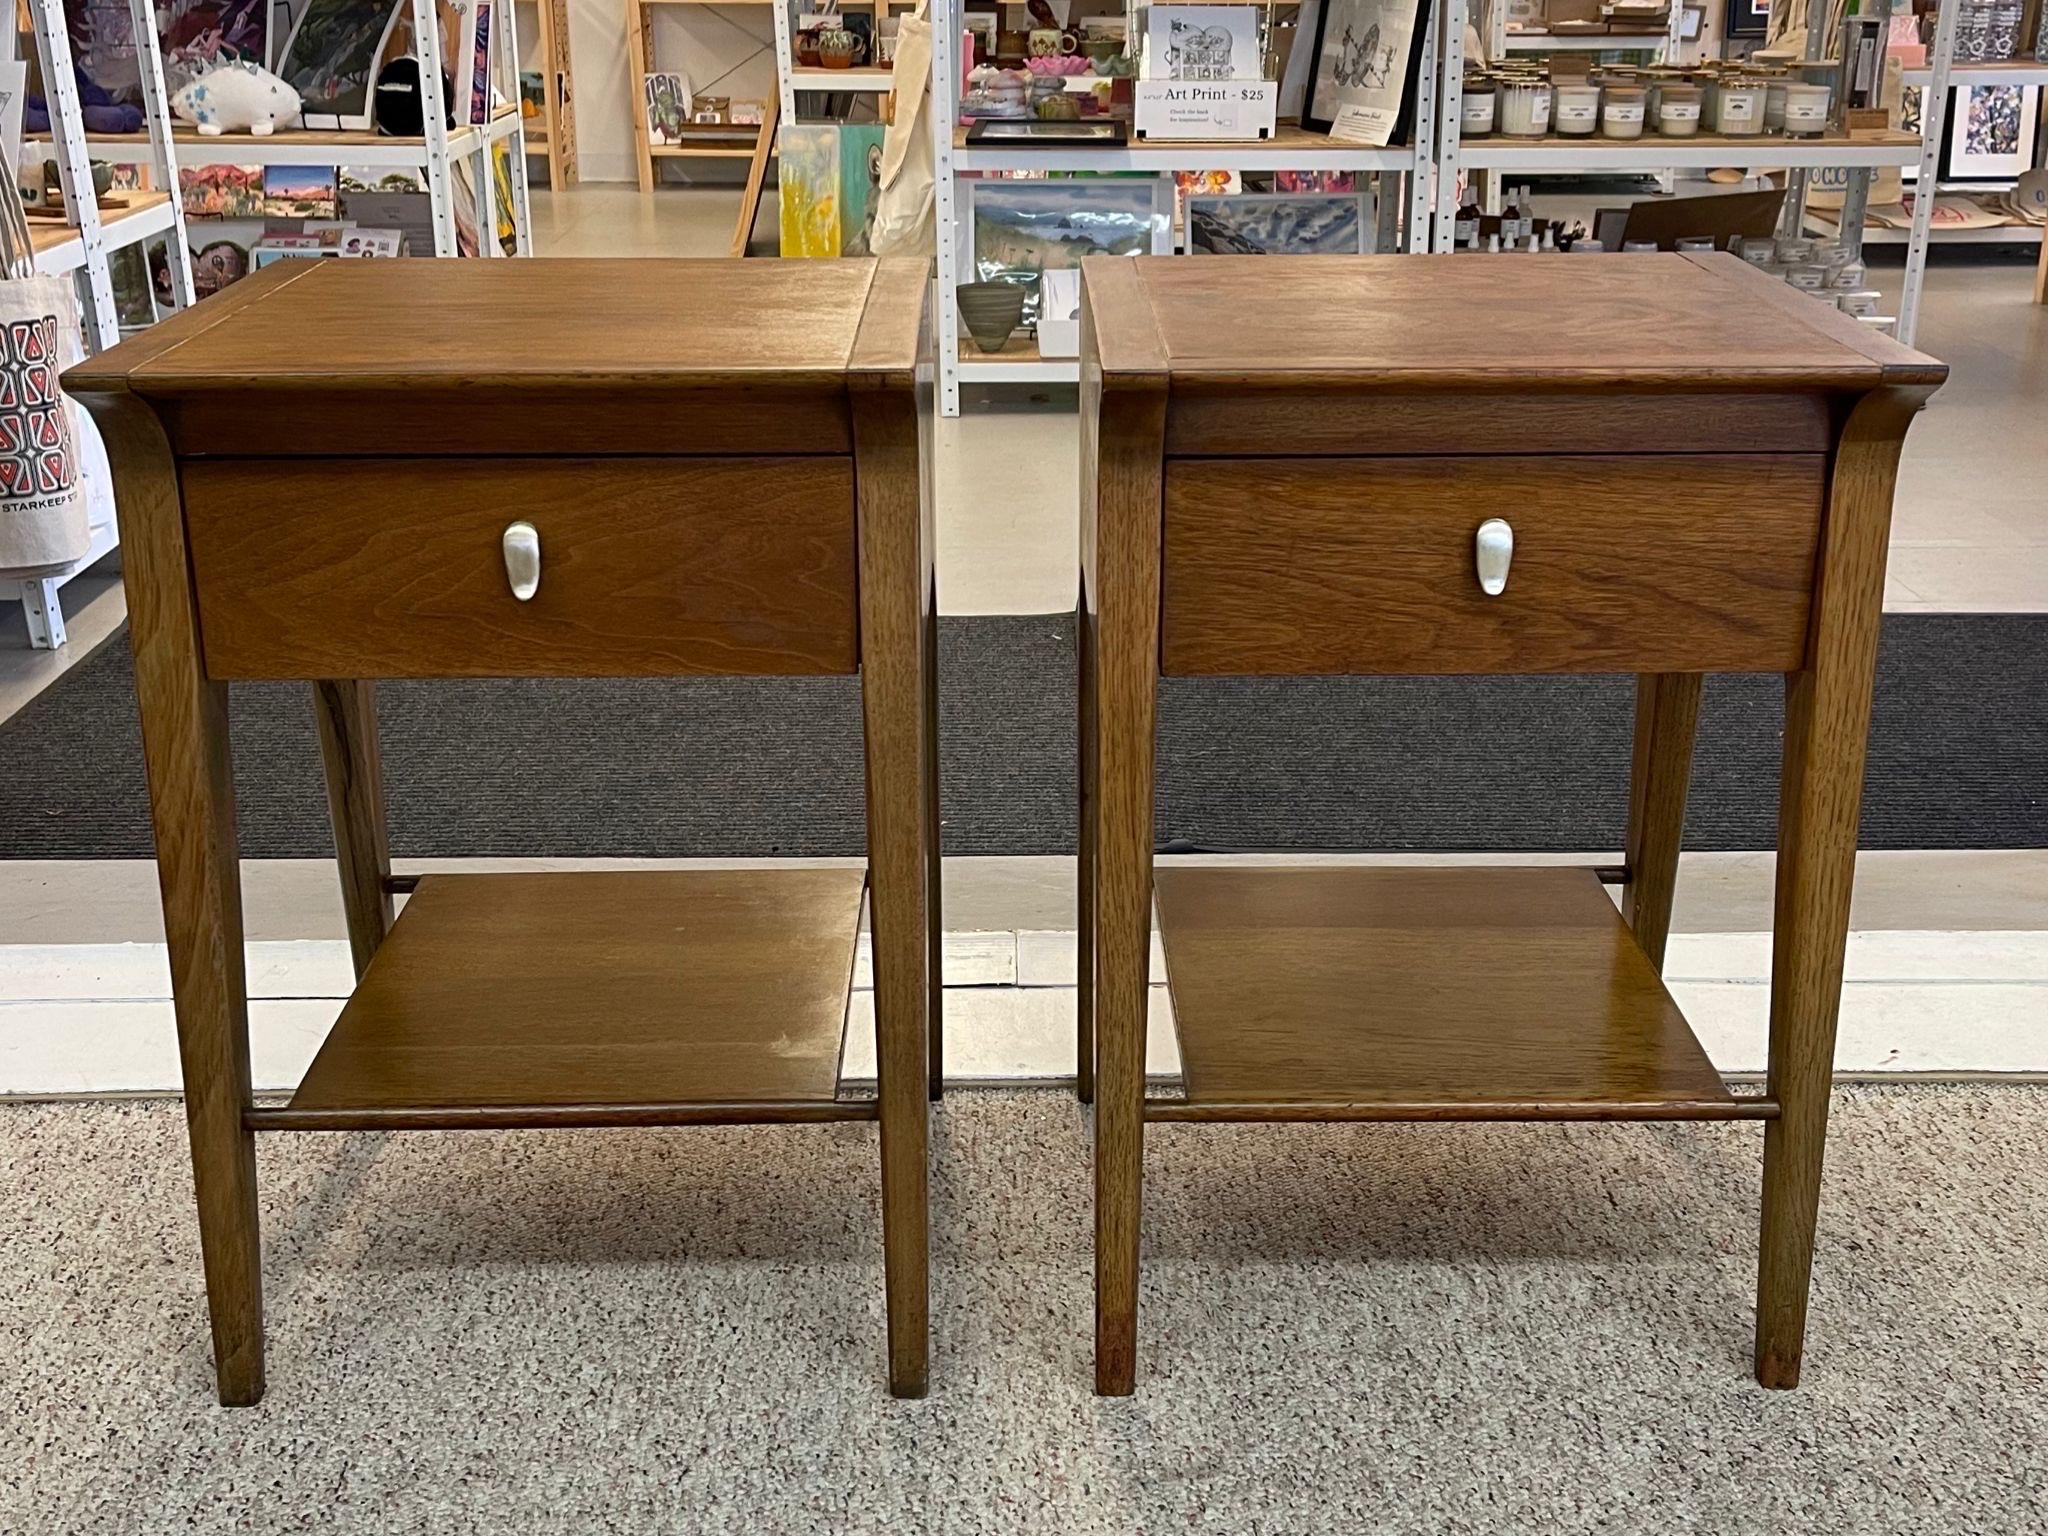 These end tables have an overhanging top with sculpted leg fronts. Lower shelf beneath a single dovetailed drawer with original hardware. Unique wood grain. Circa 1960s. Vintage Condition Consistent with Age as Pictured.

Dimensions. 18 W ; 16 D ;